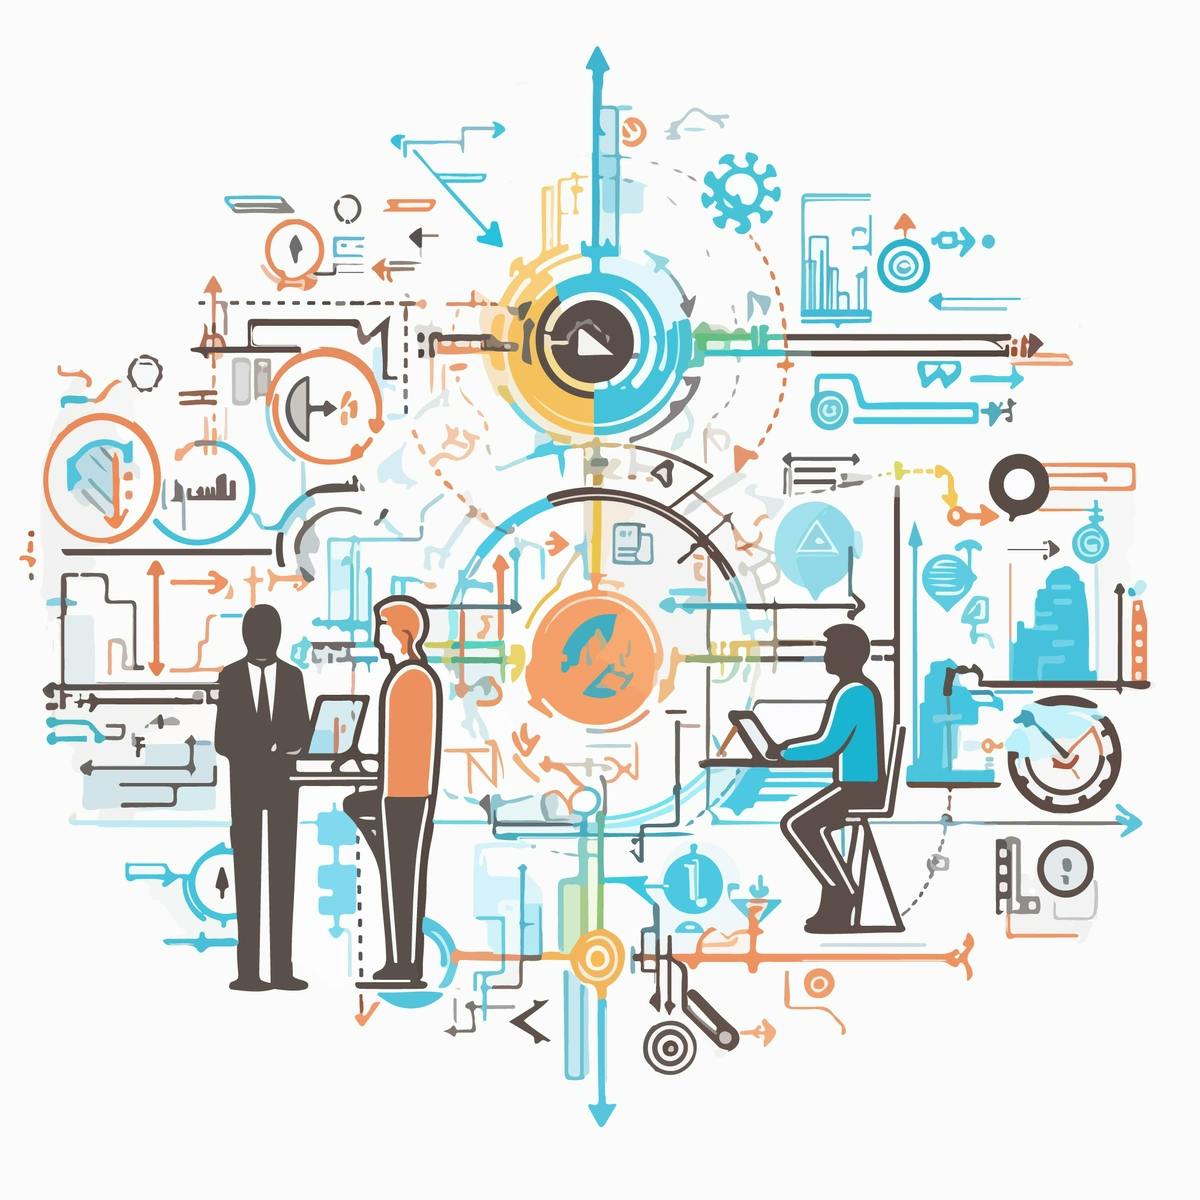 an abstract illustration blending business and technology concepts. Figures interact with elements such as charts, gears, and digital devices, symbolizing the complex interplay within modern business ecosystems.